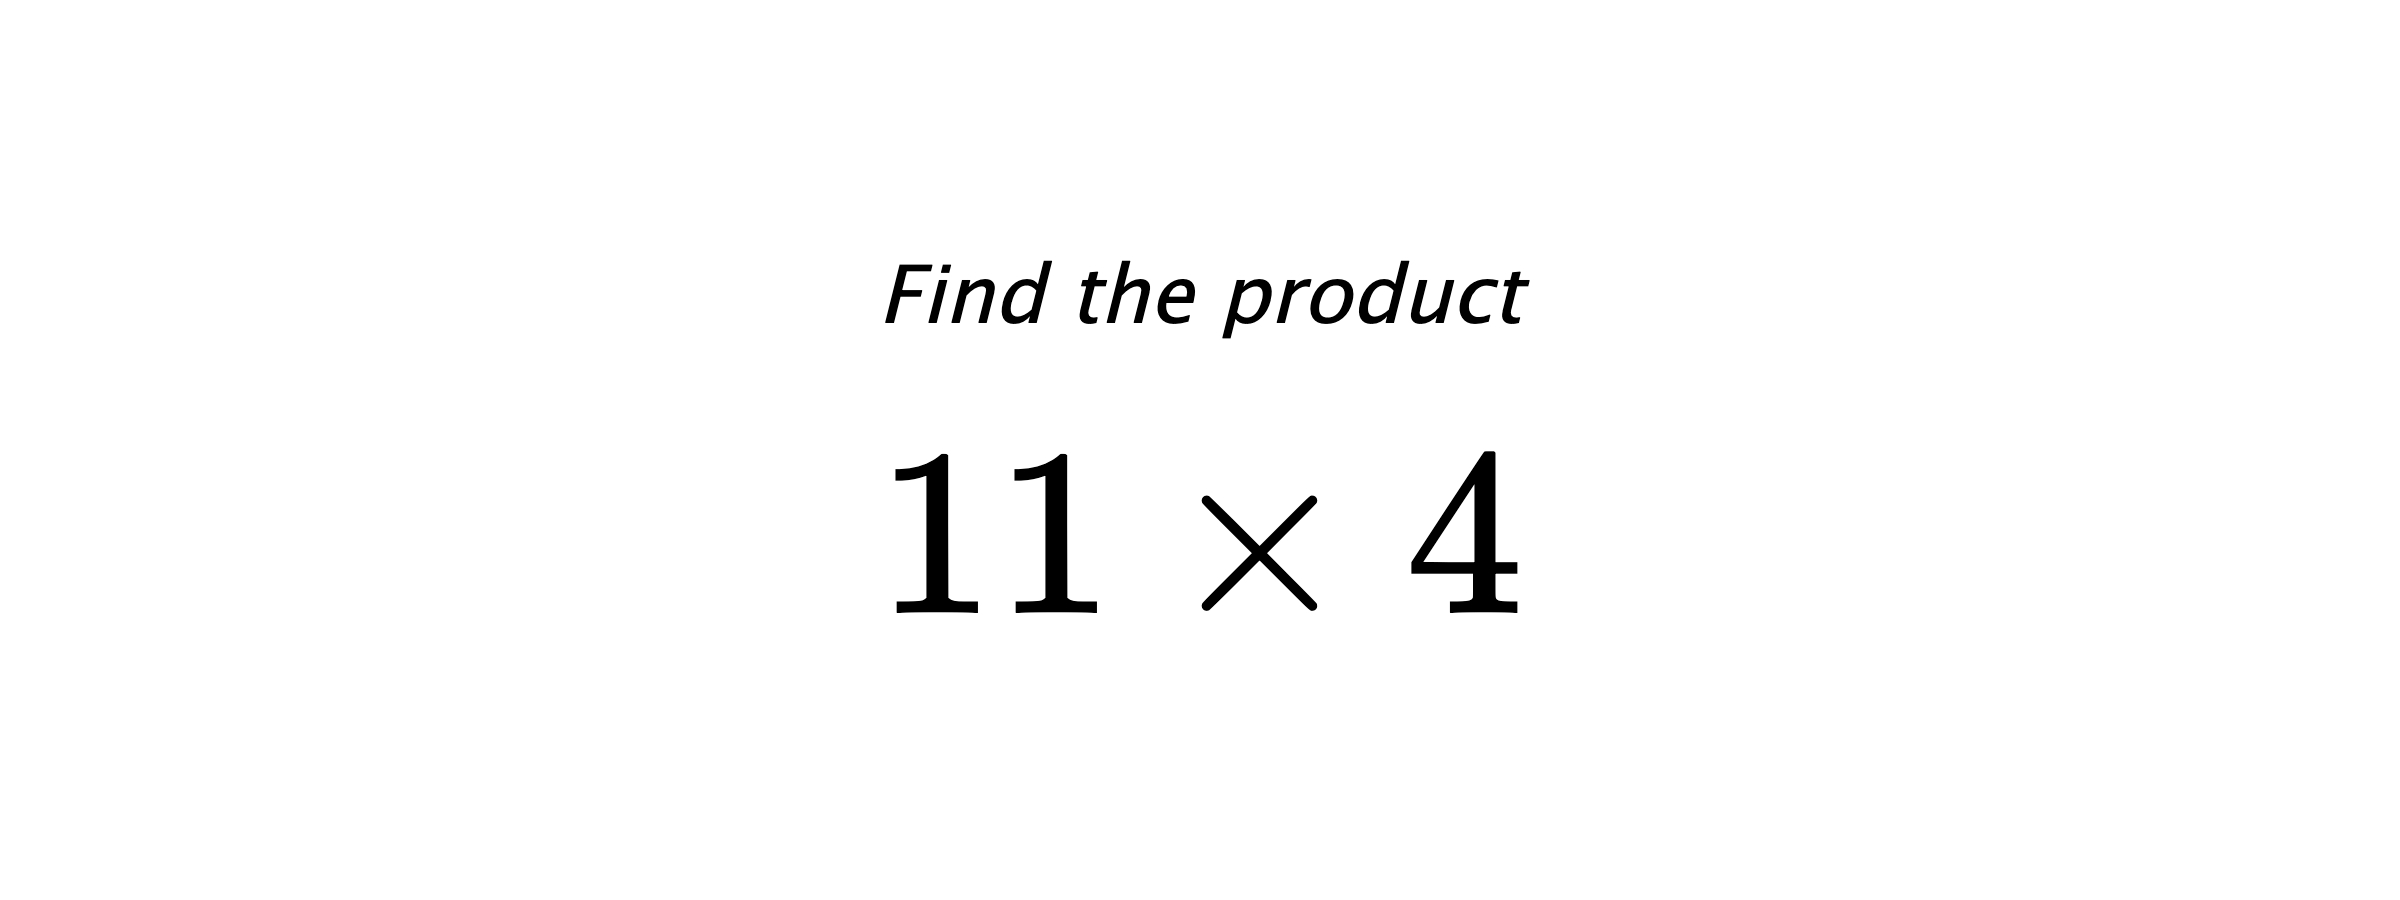 Find the product $ 11 \times 4 $